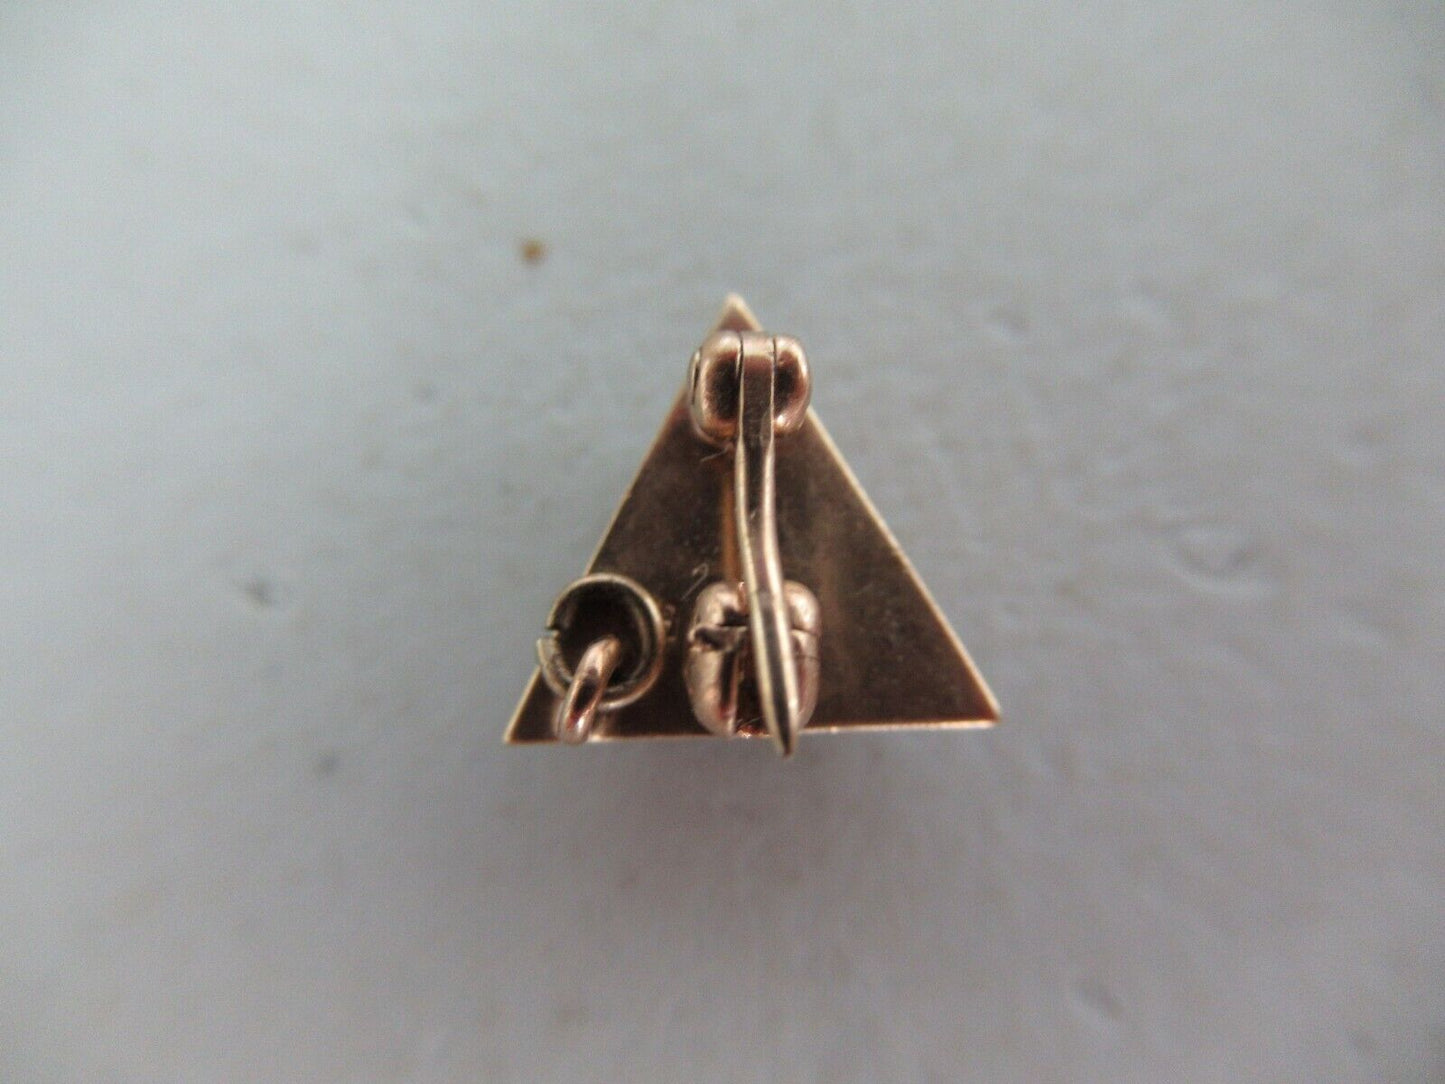 USA FRATERNITY PIN BETA DELTA. MADE IN GOLD. 1010